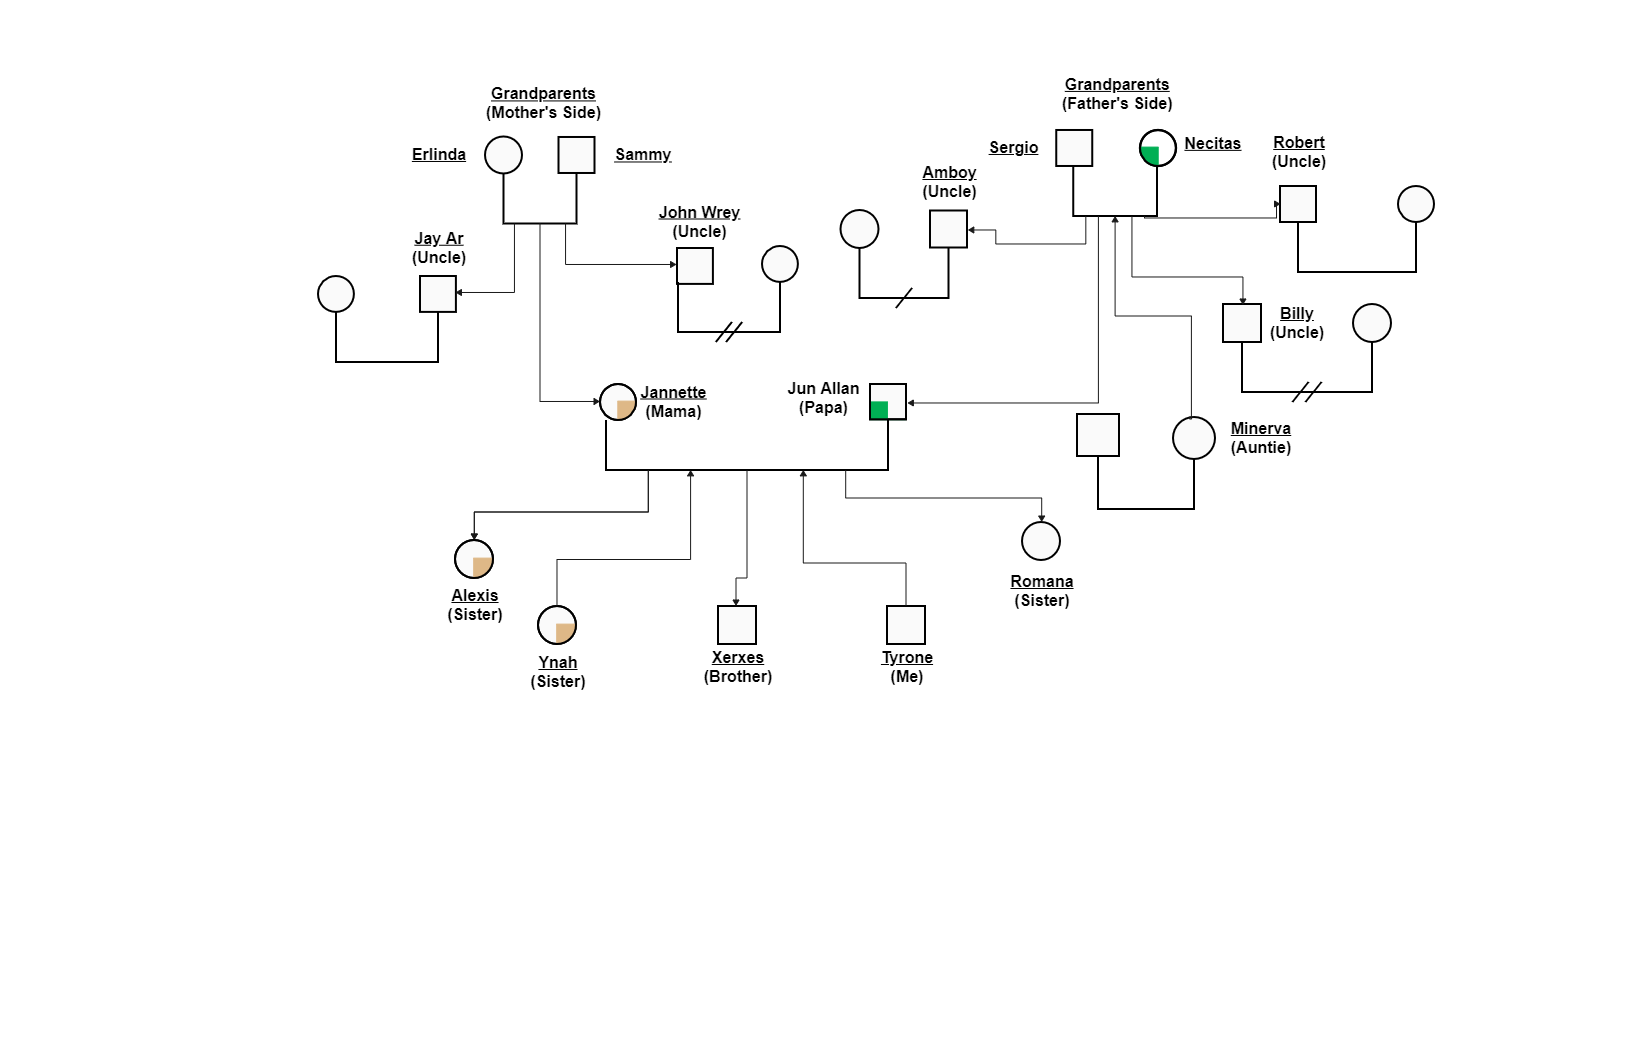 A graphic of Stephen's personal family tree with mother and father sides has depicted here. A genogram is created with simple symbols representing the gender, with various lines to illustrate family relationships. A genogram is a really useful tool for he